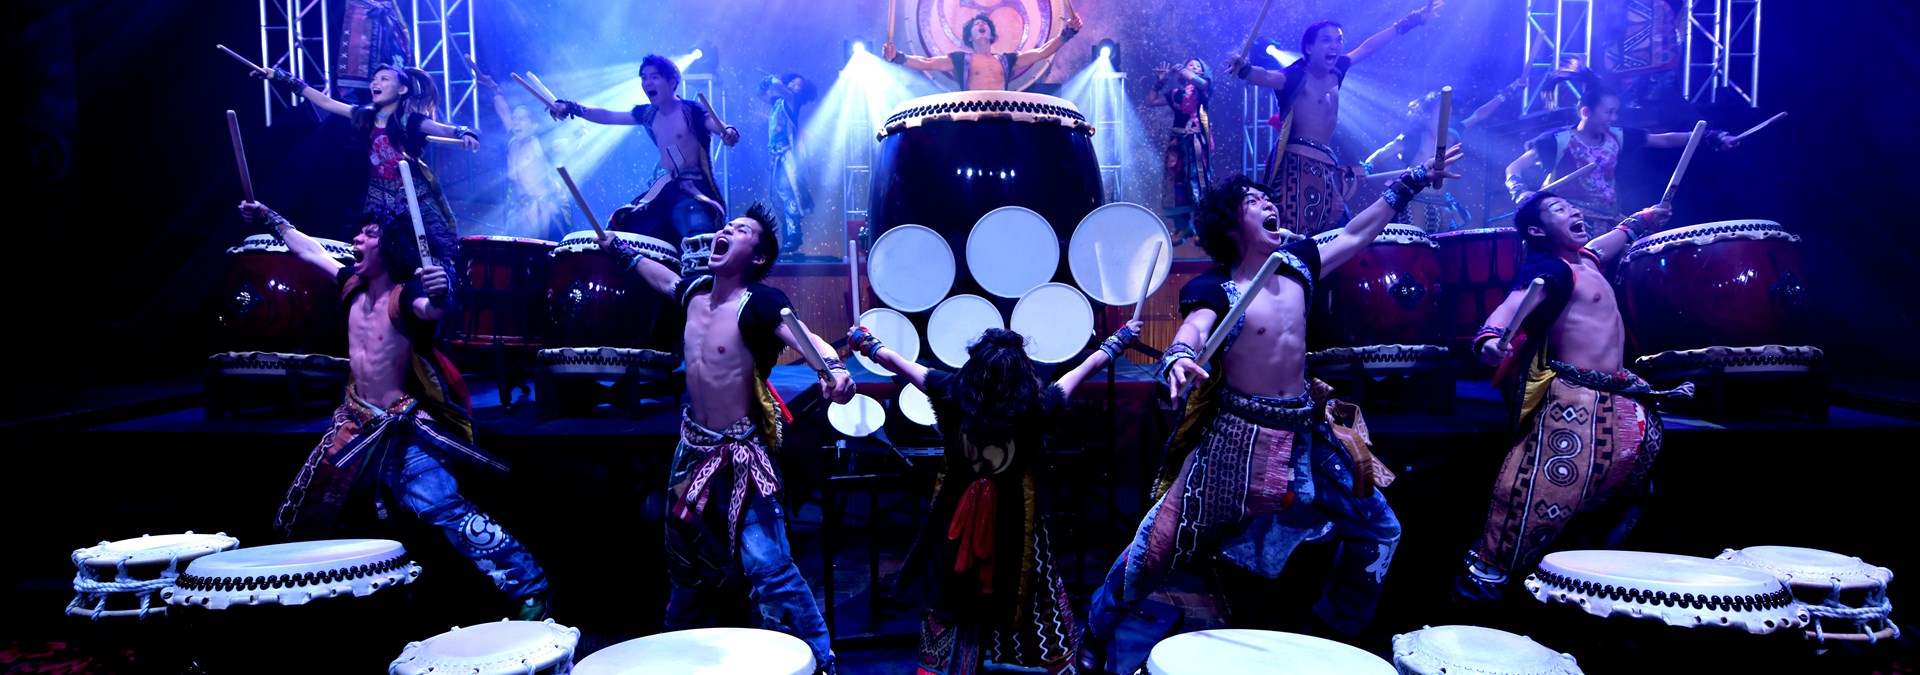 Mei18 Yamato The Drummers Of Japan9